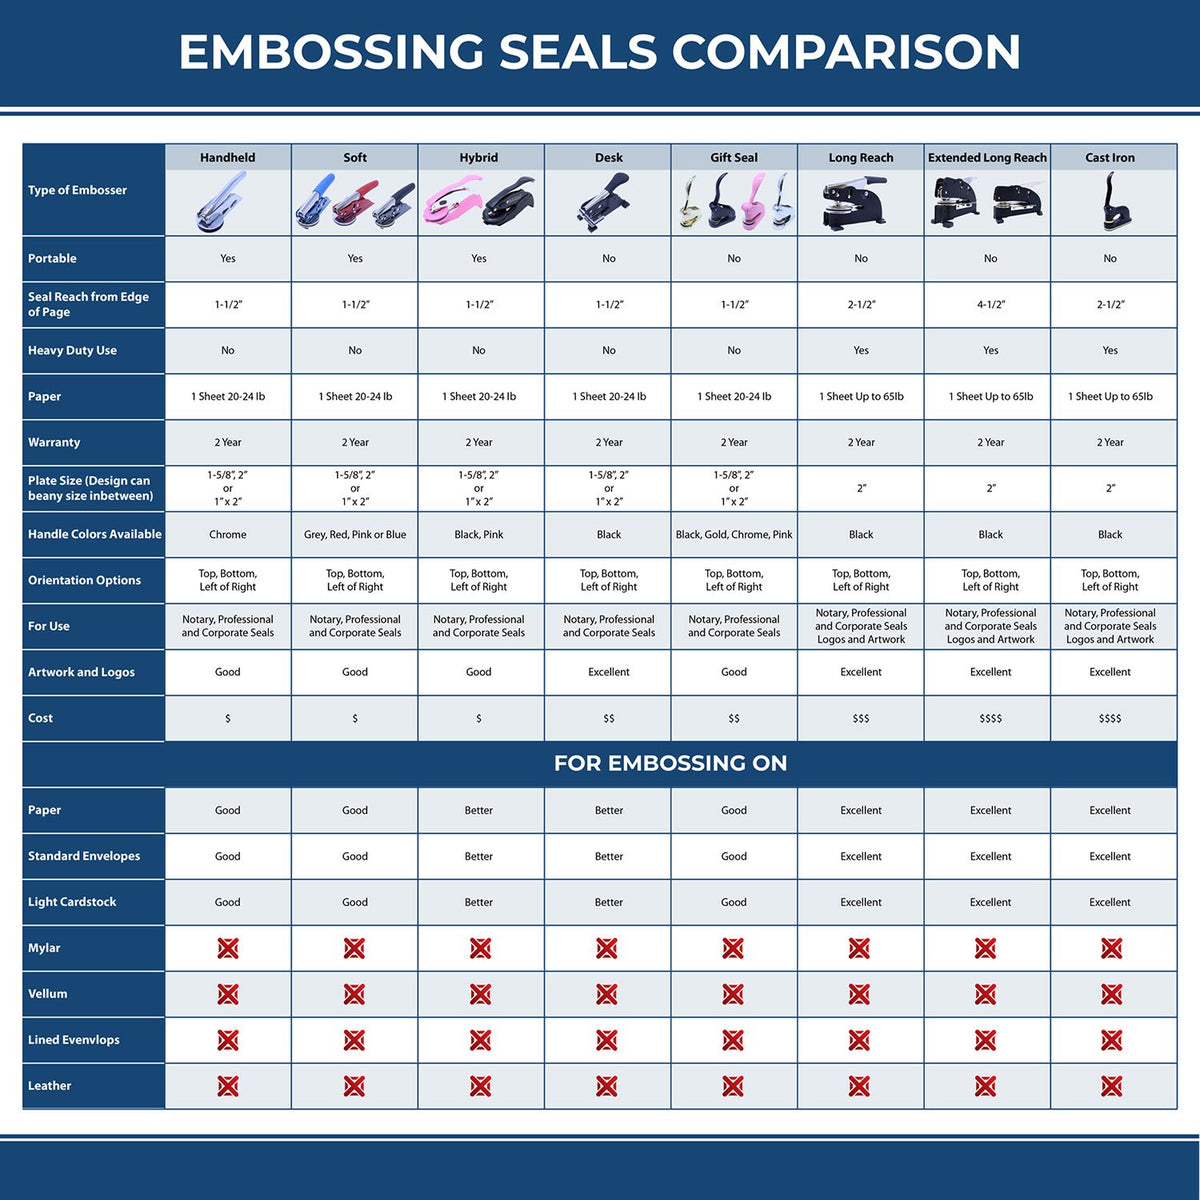 A comparison chart for the different types of mount models available for the Soft Pocket Arizona Landscape Architect Embosser.